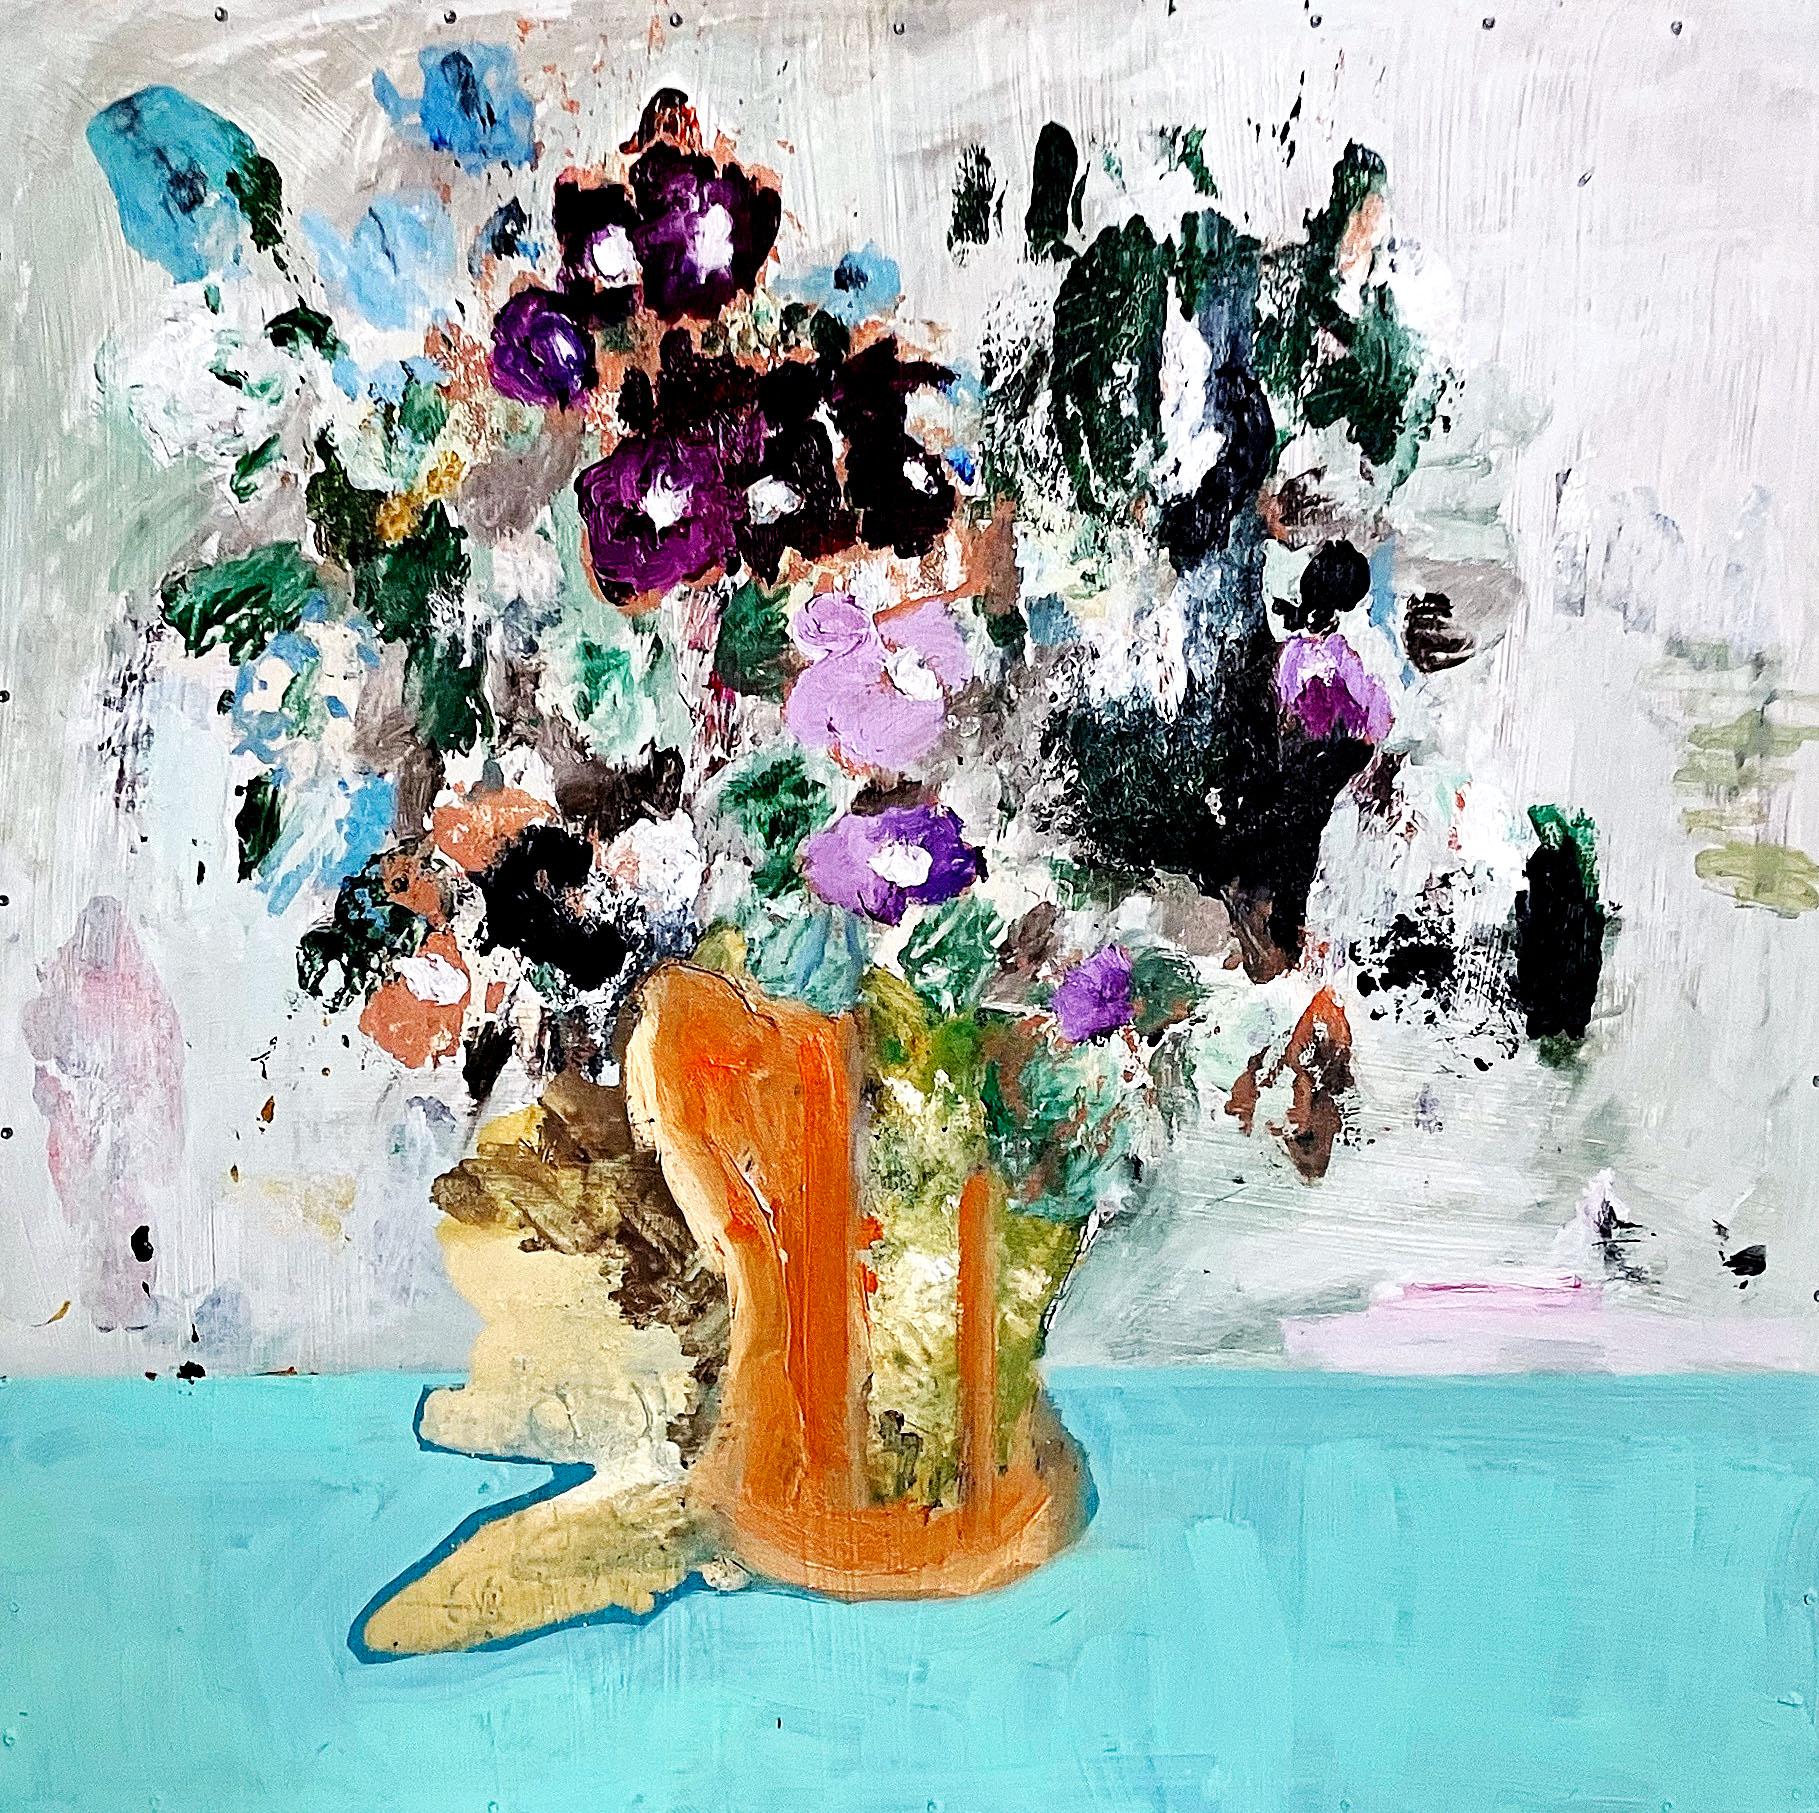 C. Dimitri Still-Life Painting - If It Makes You Happy, colorful flowers, thick paint, cheerful abstracted floral